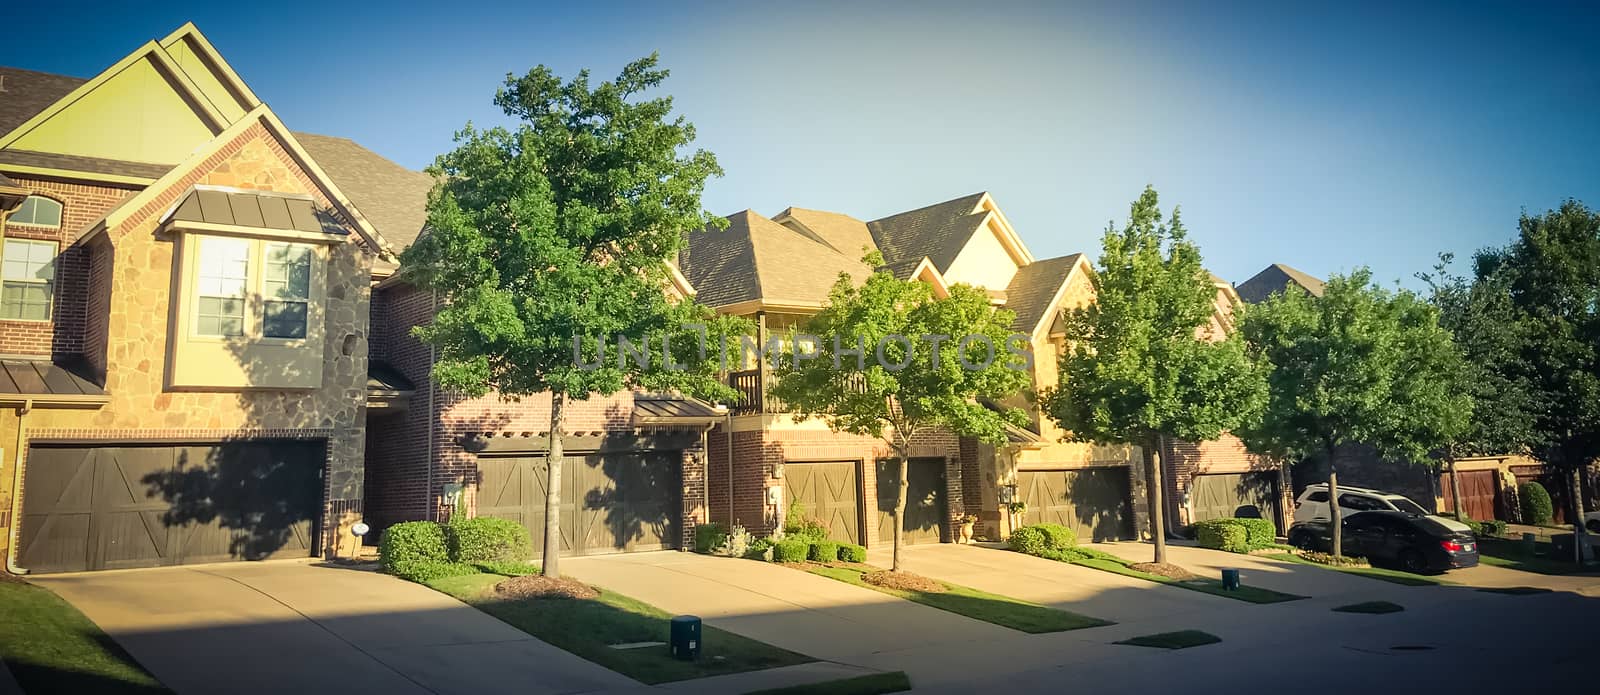 Panorama view row of brand new attached houses townhome style with double wooden garage doors and small front yard. Townhouse units outside Dallas, Texas, USA. Two stories house nice trim landscape